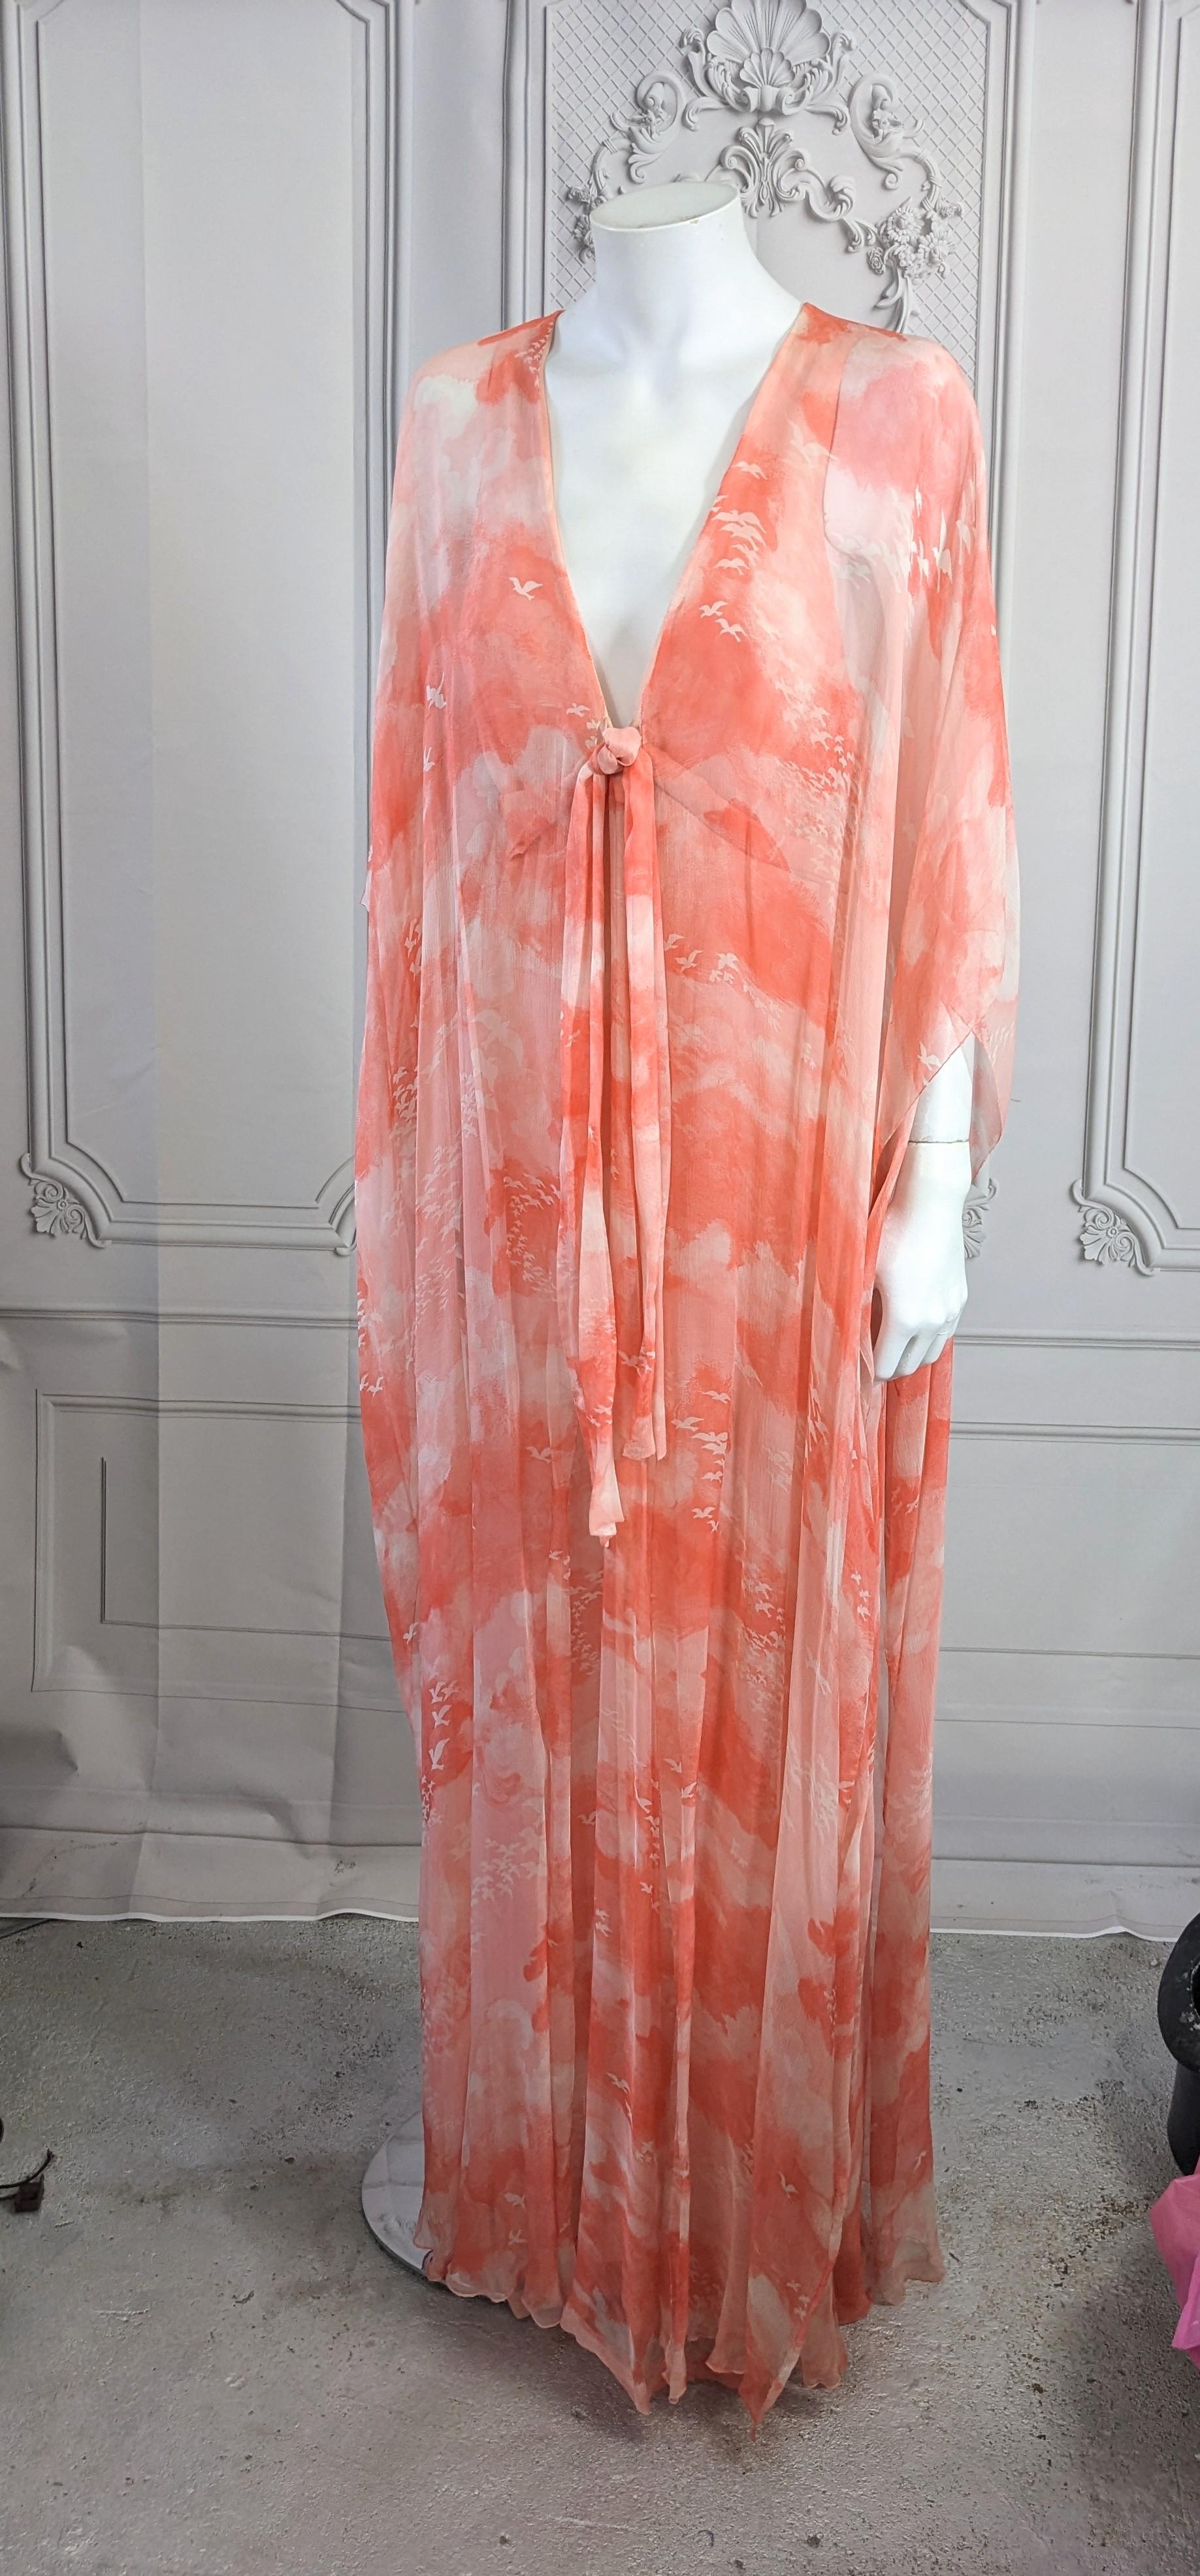 Floaty Hanae Mori Haute Couture Chiffon Caftan Gown from the 1980's. Signature, dreamy cloud and sea gull silk chiffon print is used for a caftan attached to a halter style dress underneath. 
Sheer poncho floats over under dress. Deep V neckline